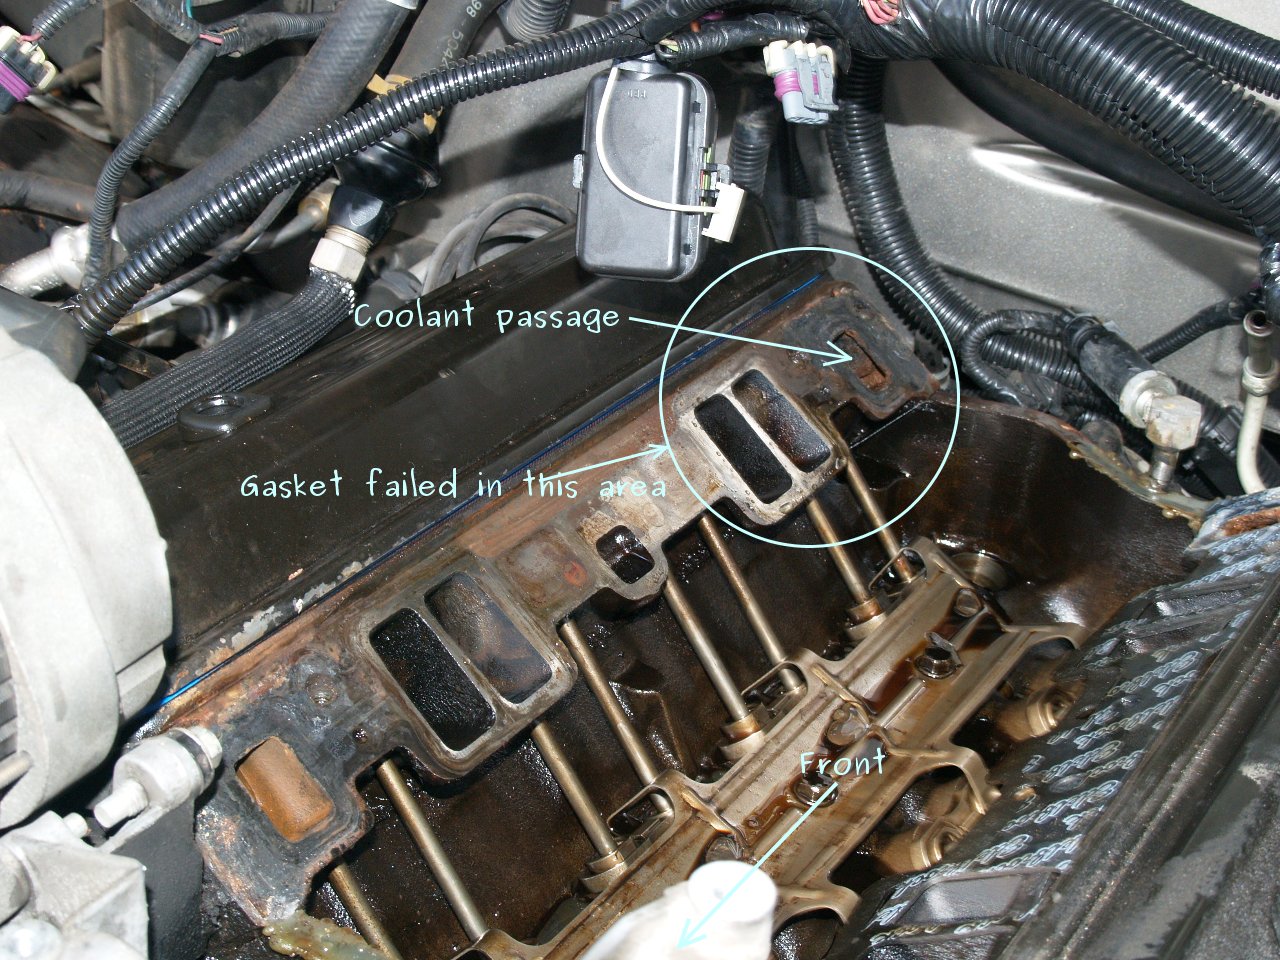 See P3996 in engine